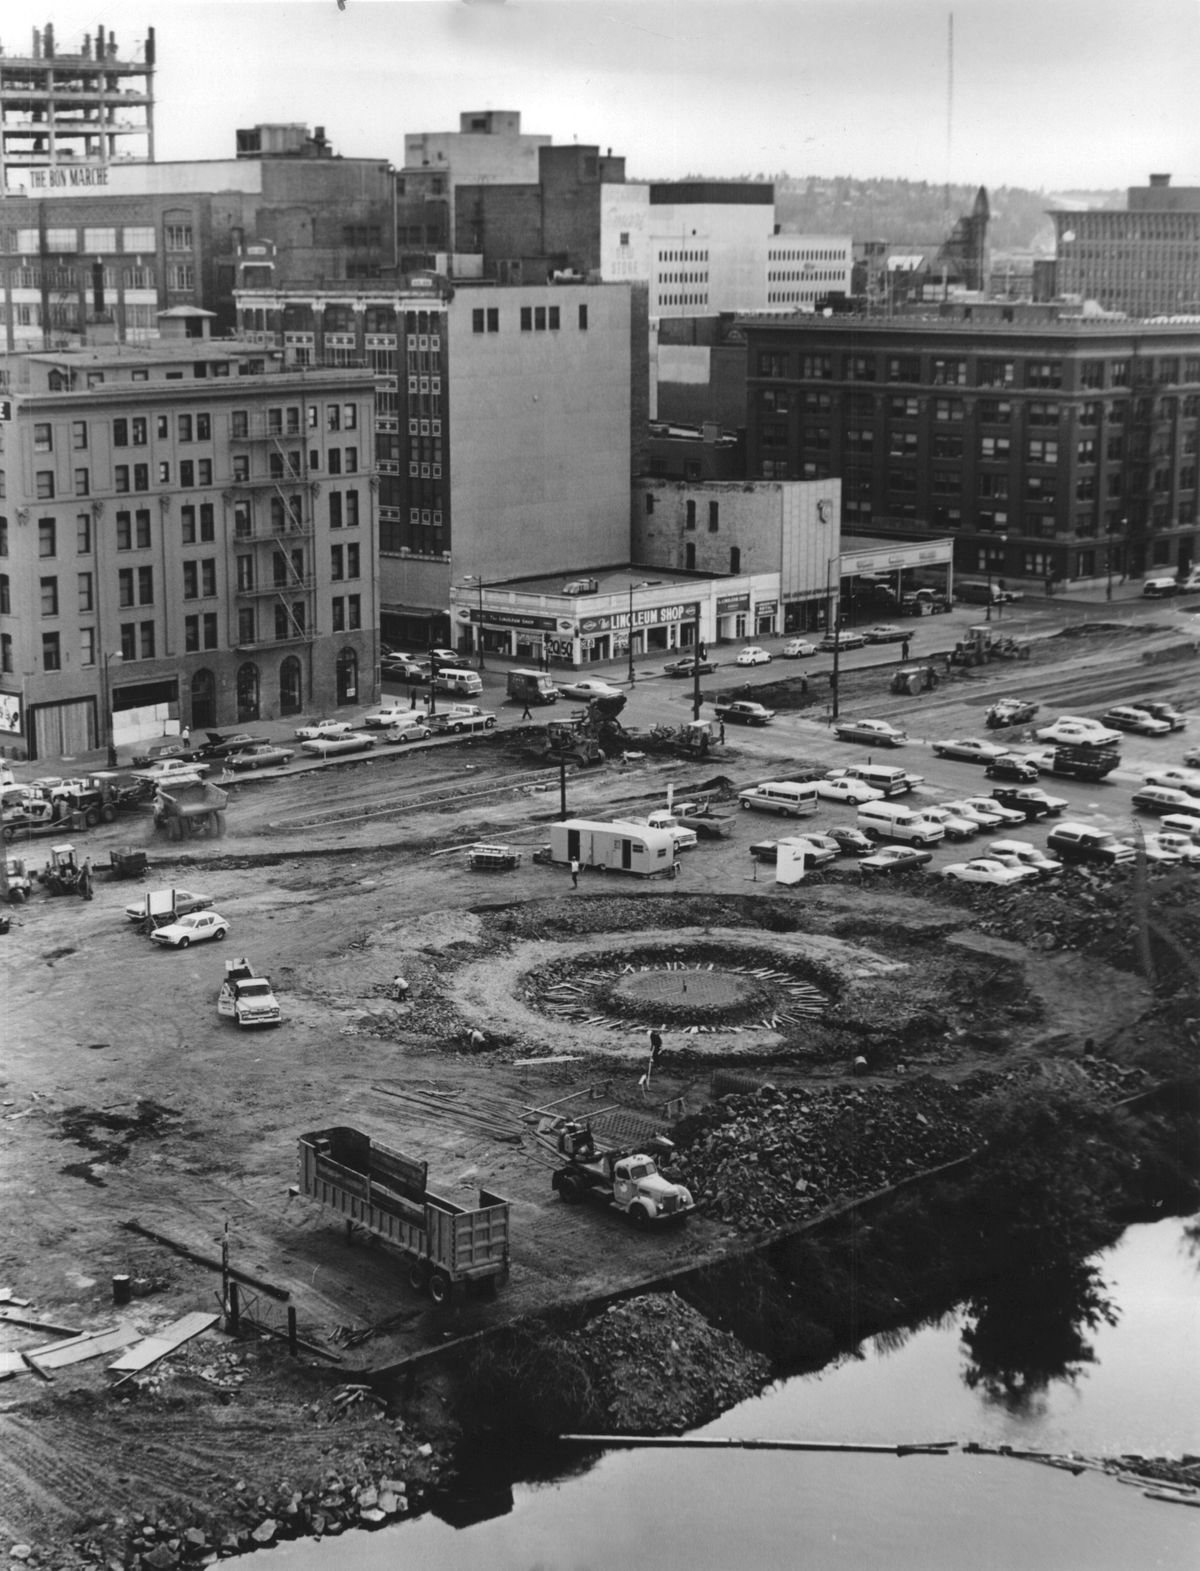 1973 - A doughnut-shaped excavation for the machinery under the historic Looff Carousel is shown on the grounds of Expo ’74 in Spokane. But the carousel wasn’t installed until after the world’s fair for fear that the venerable attraction might be damaged. The 10-sided building was used as a Bavarian beer garden at Expo ’74. (PHOTO ARCHIVE/THE SPOKESMAN-REVIEW / SR)